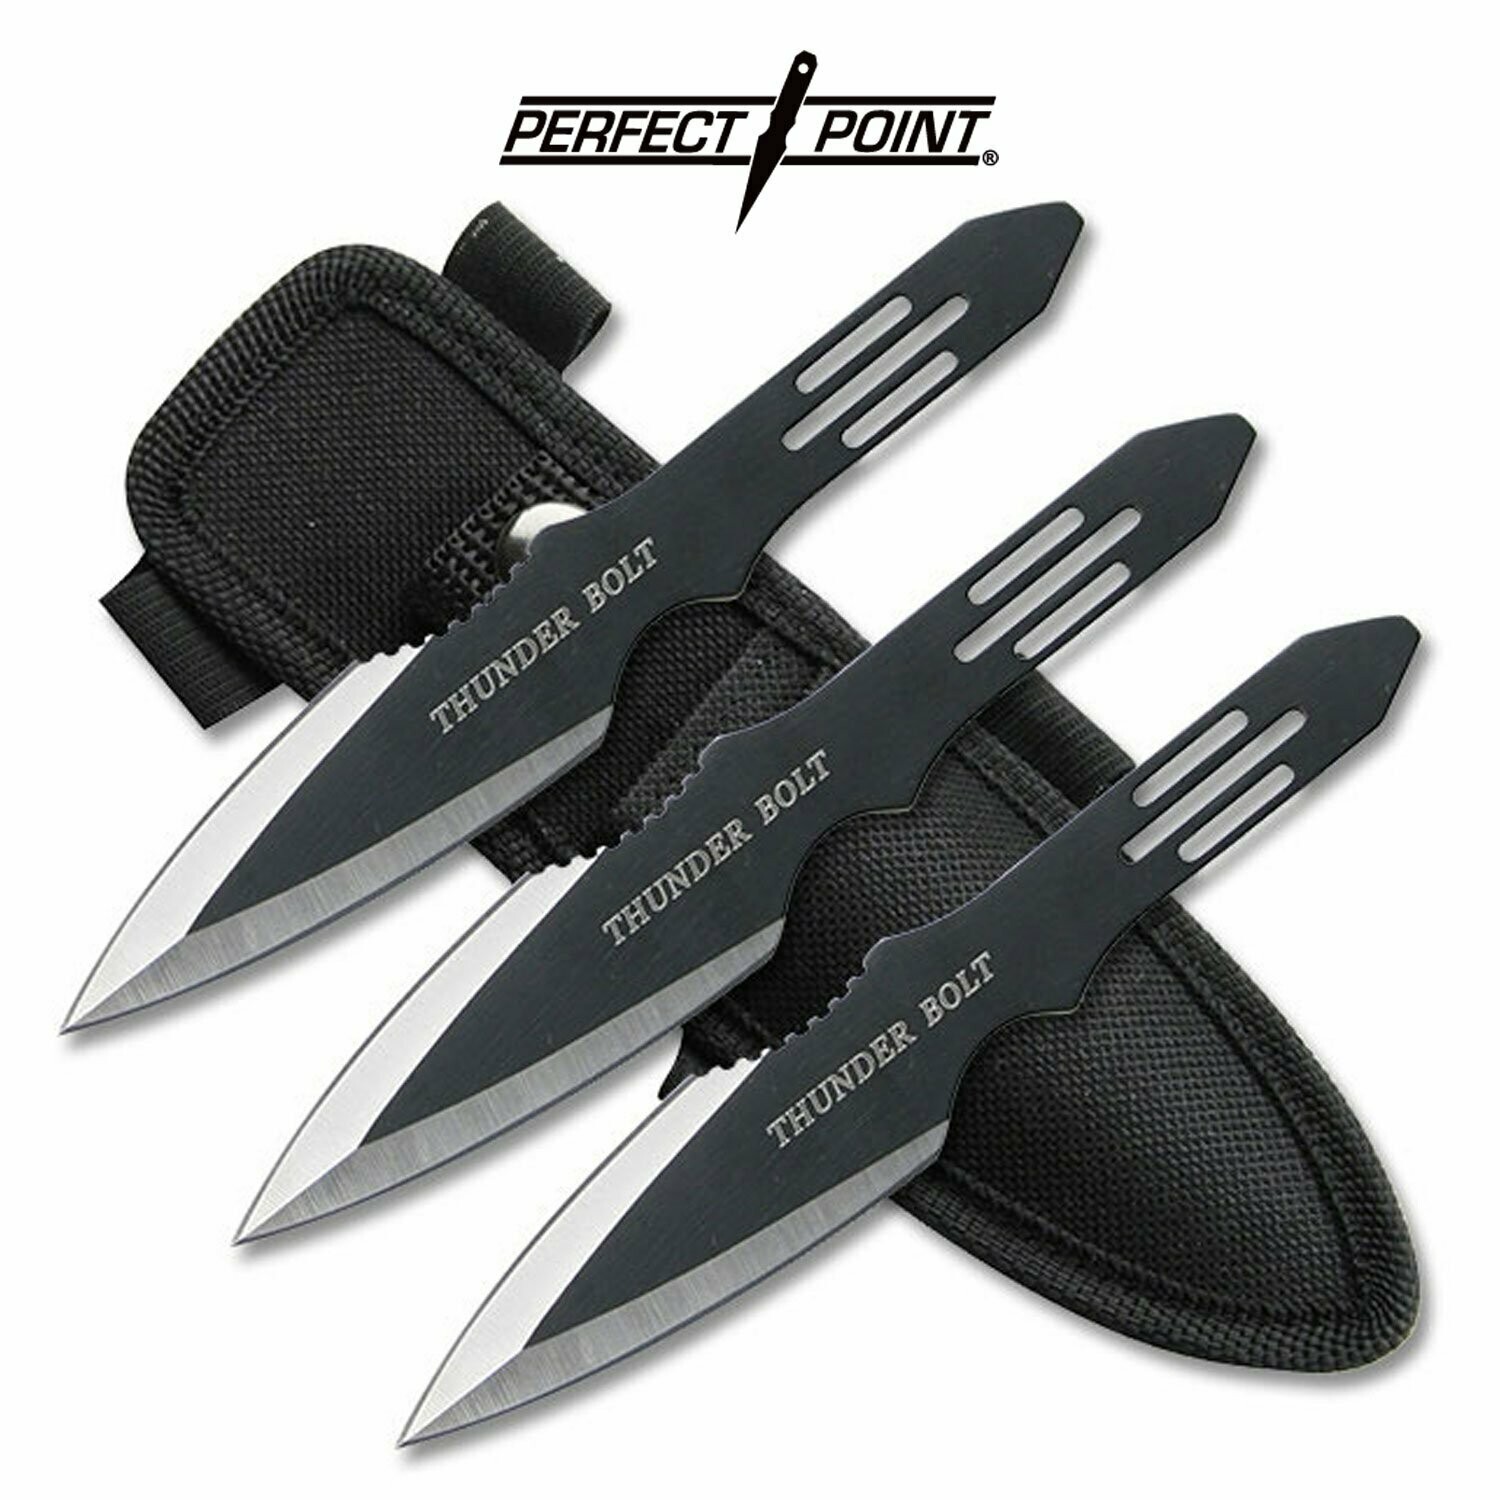 Black Ultimate Zues's ThunderBolt Throwing Knives 3 Pc Set